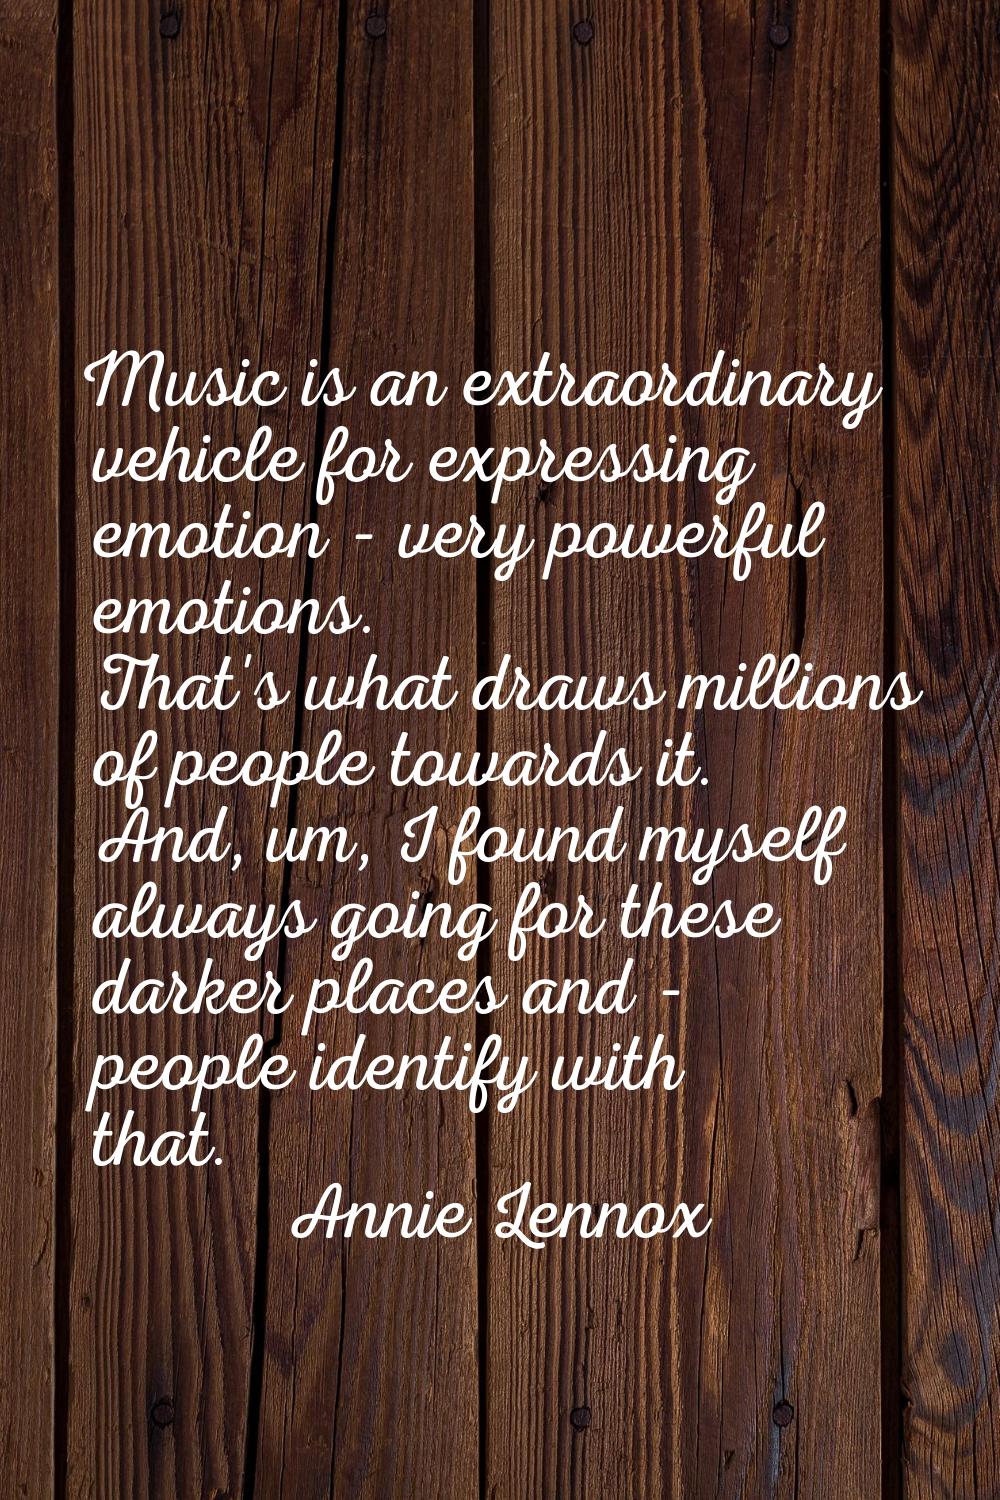 Music is an extraordinary vehicle for expressing emotion - very powerful emotions. That's what draw